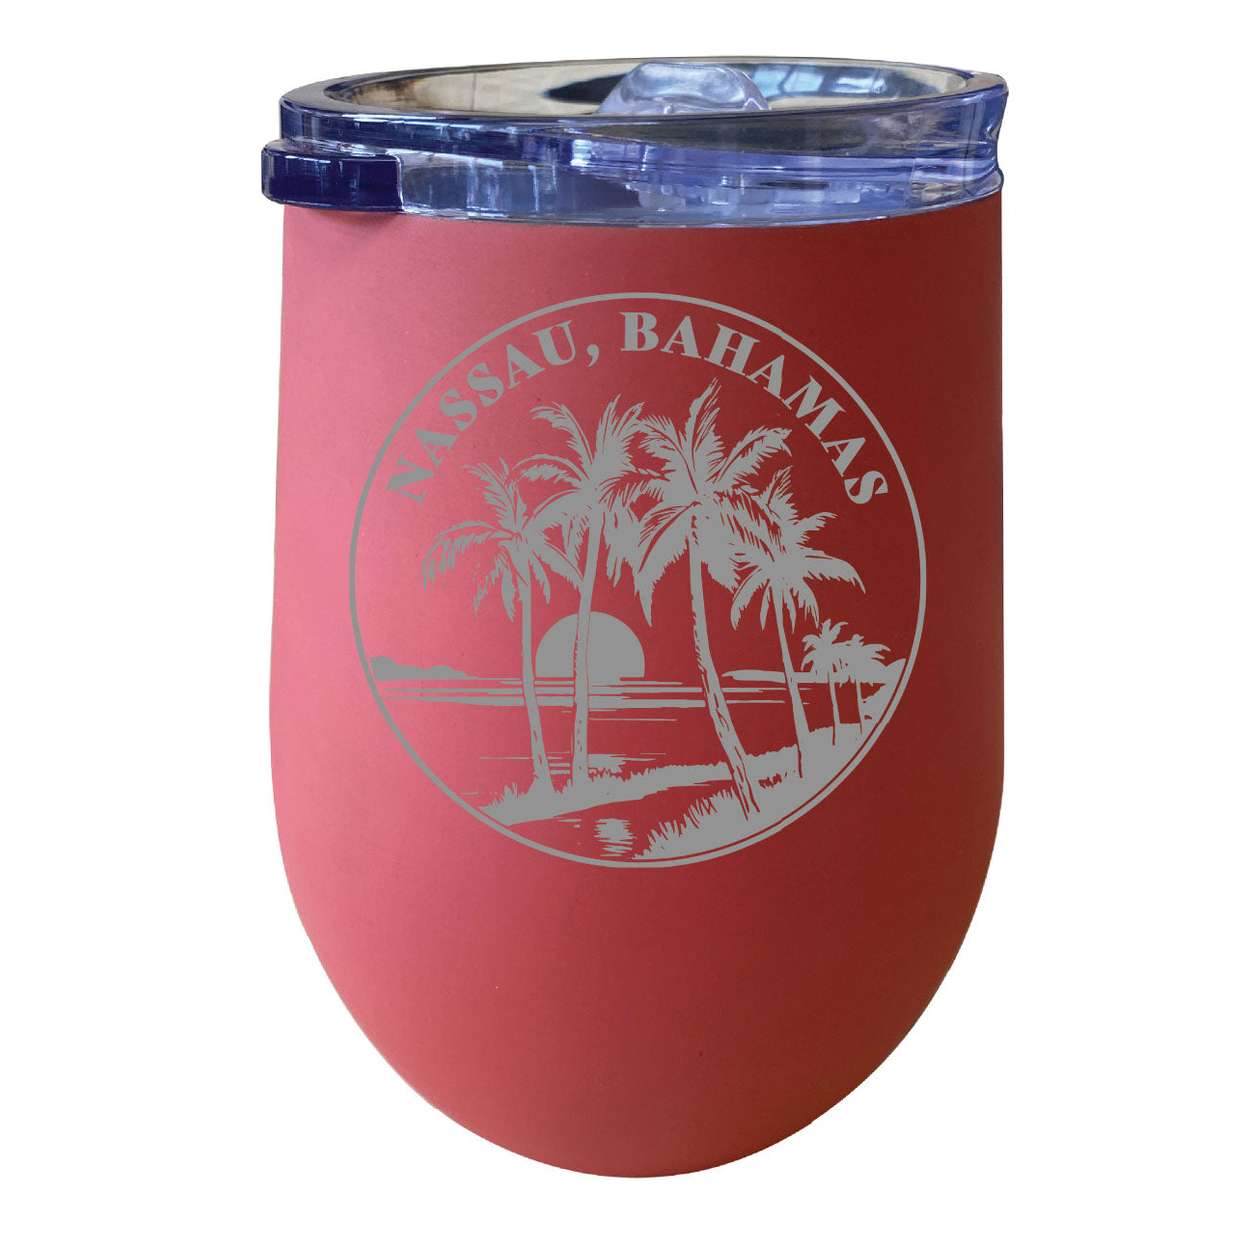 Nassau The Bahamas Souvenir 12 Oz Engraved Insulated Wine Stainless Steel Tumbler - Coral,,Single Unit